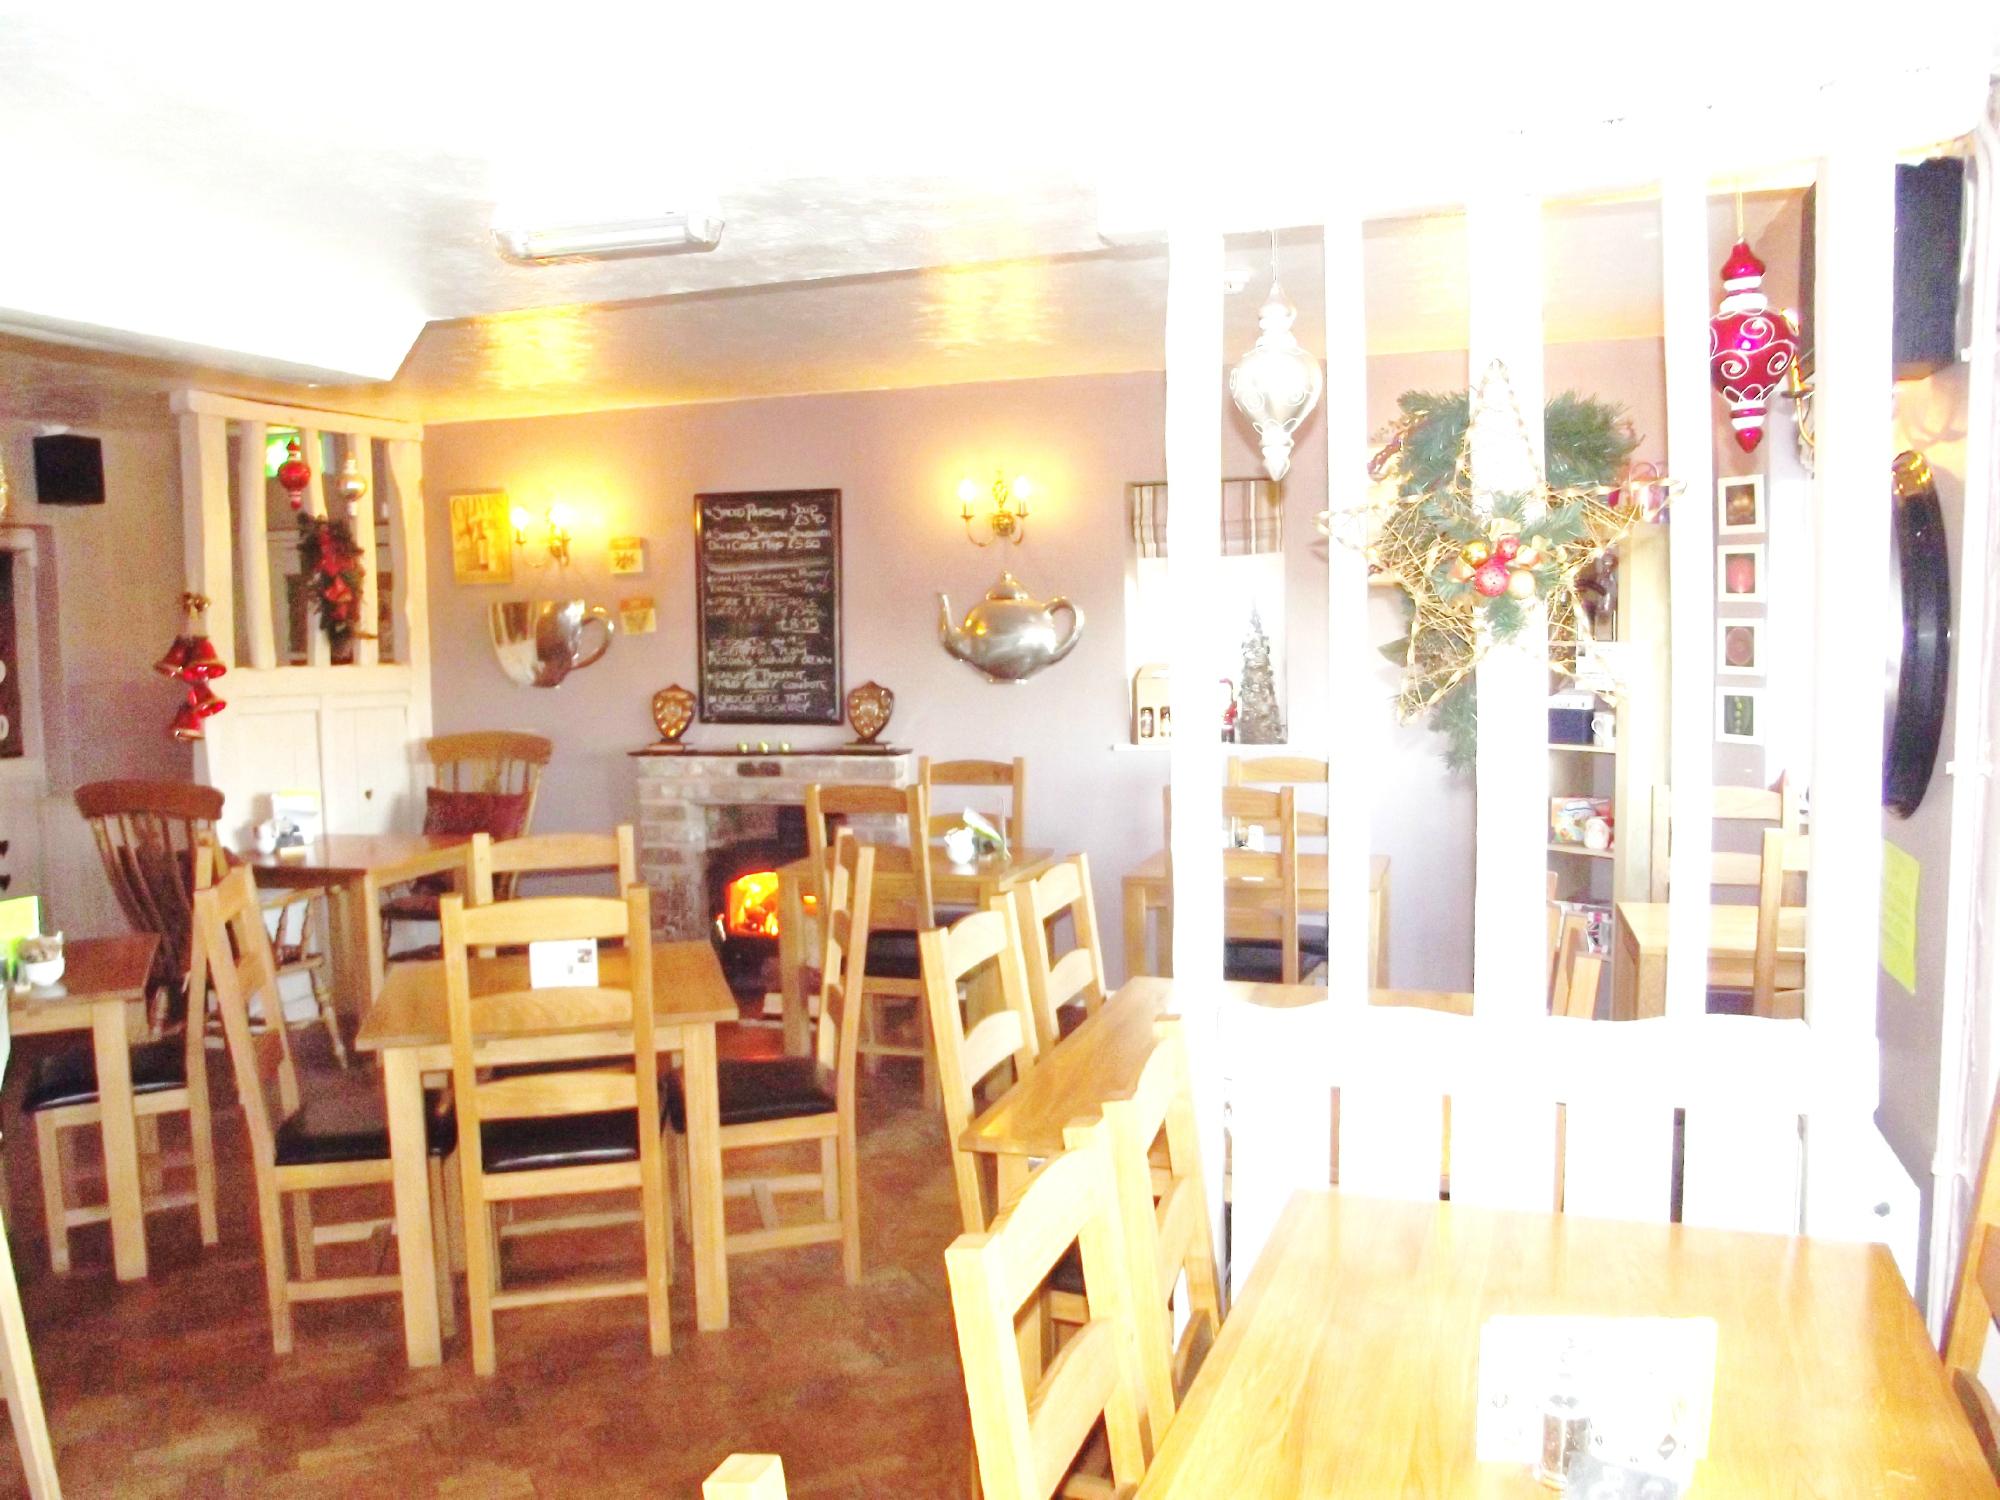 The Colliers Farm Shop and Cafe